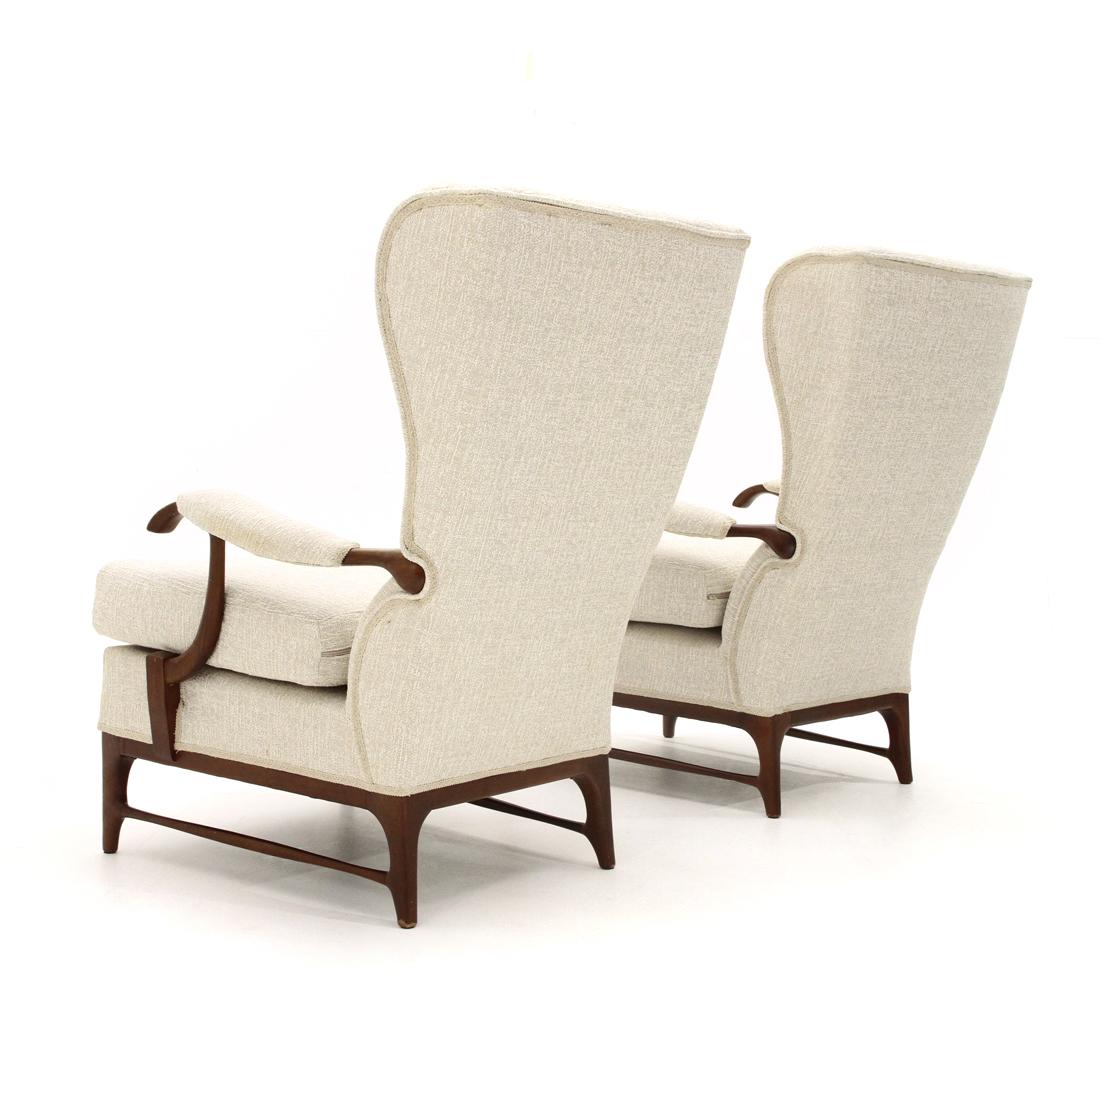 Mid-20th Century Pair of armchairs in ivory white fabric by Framar, 1950s For Sale